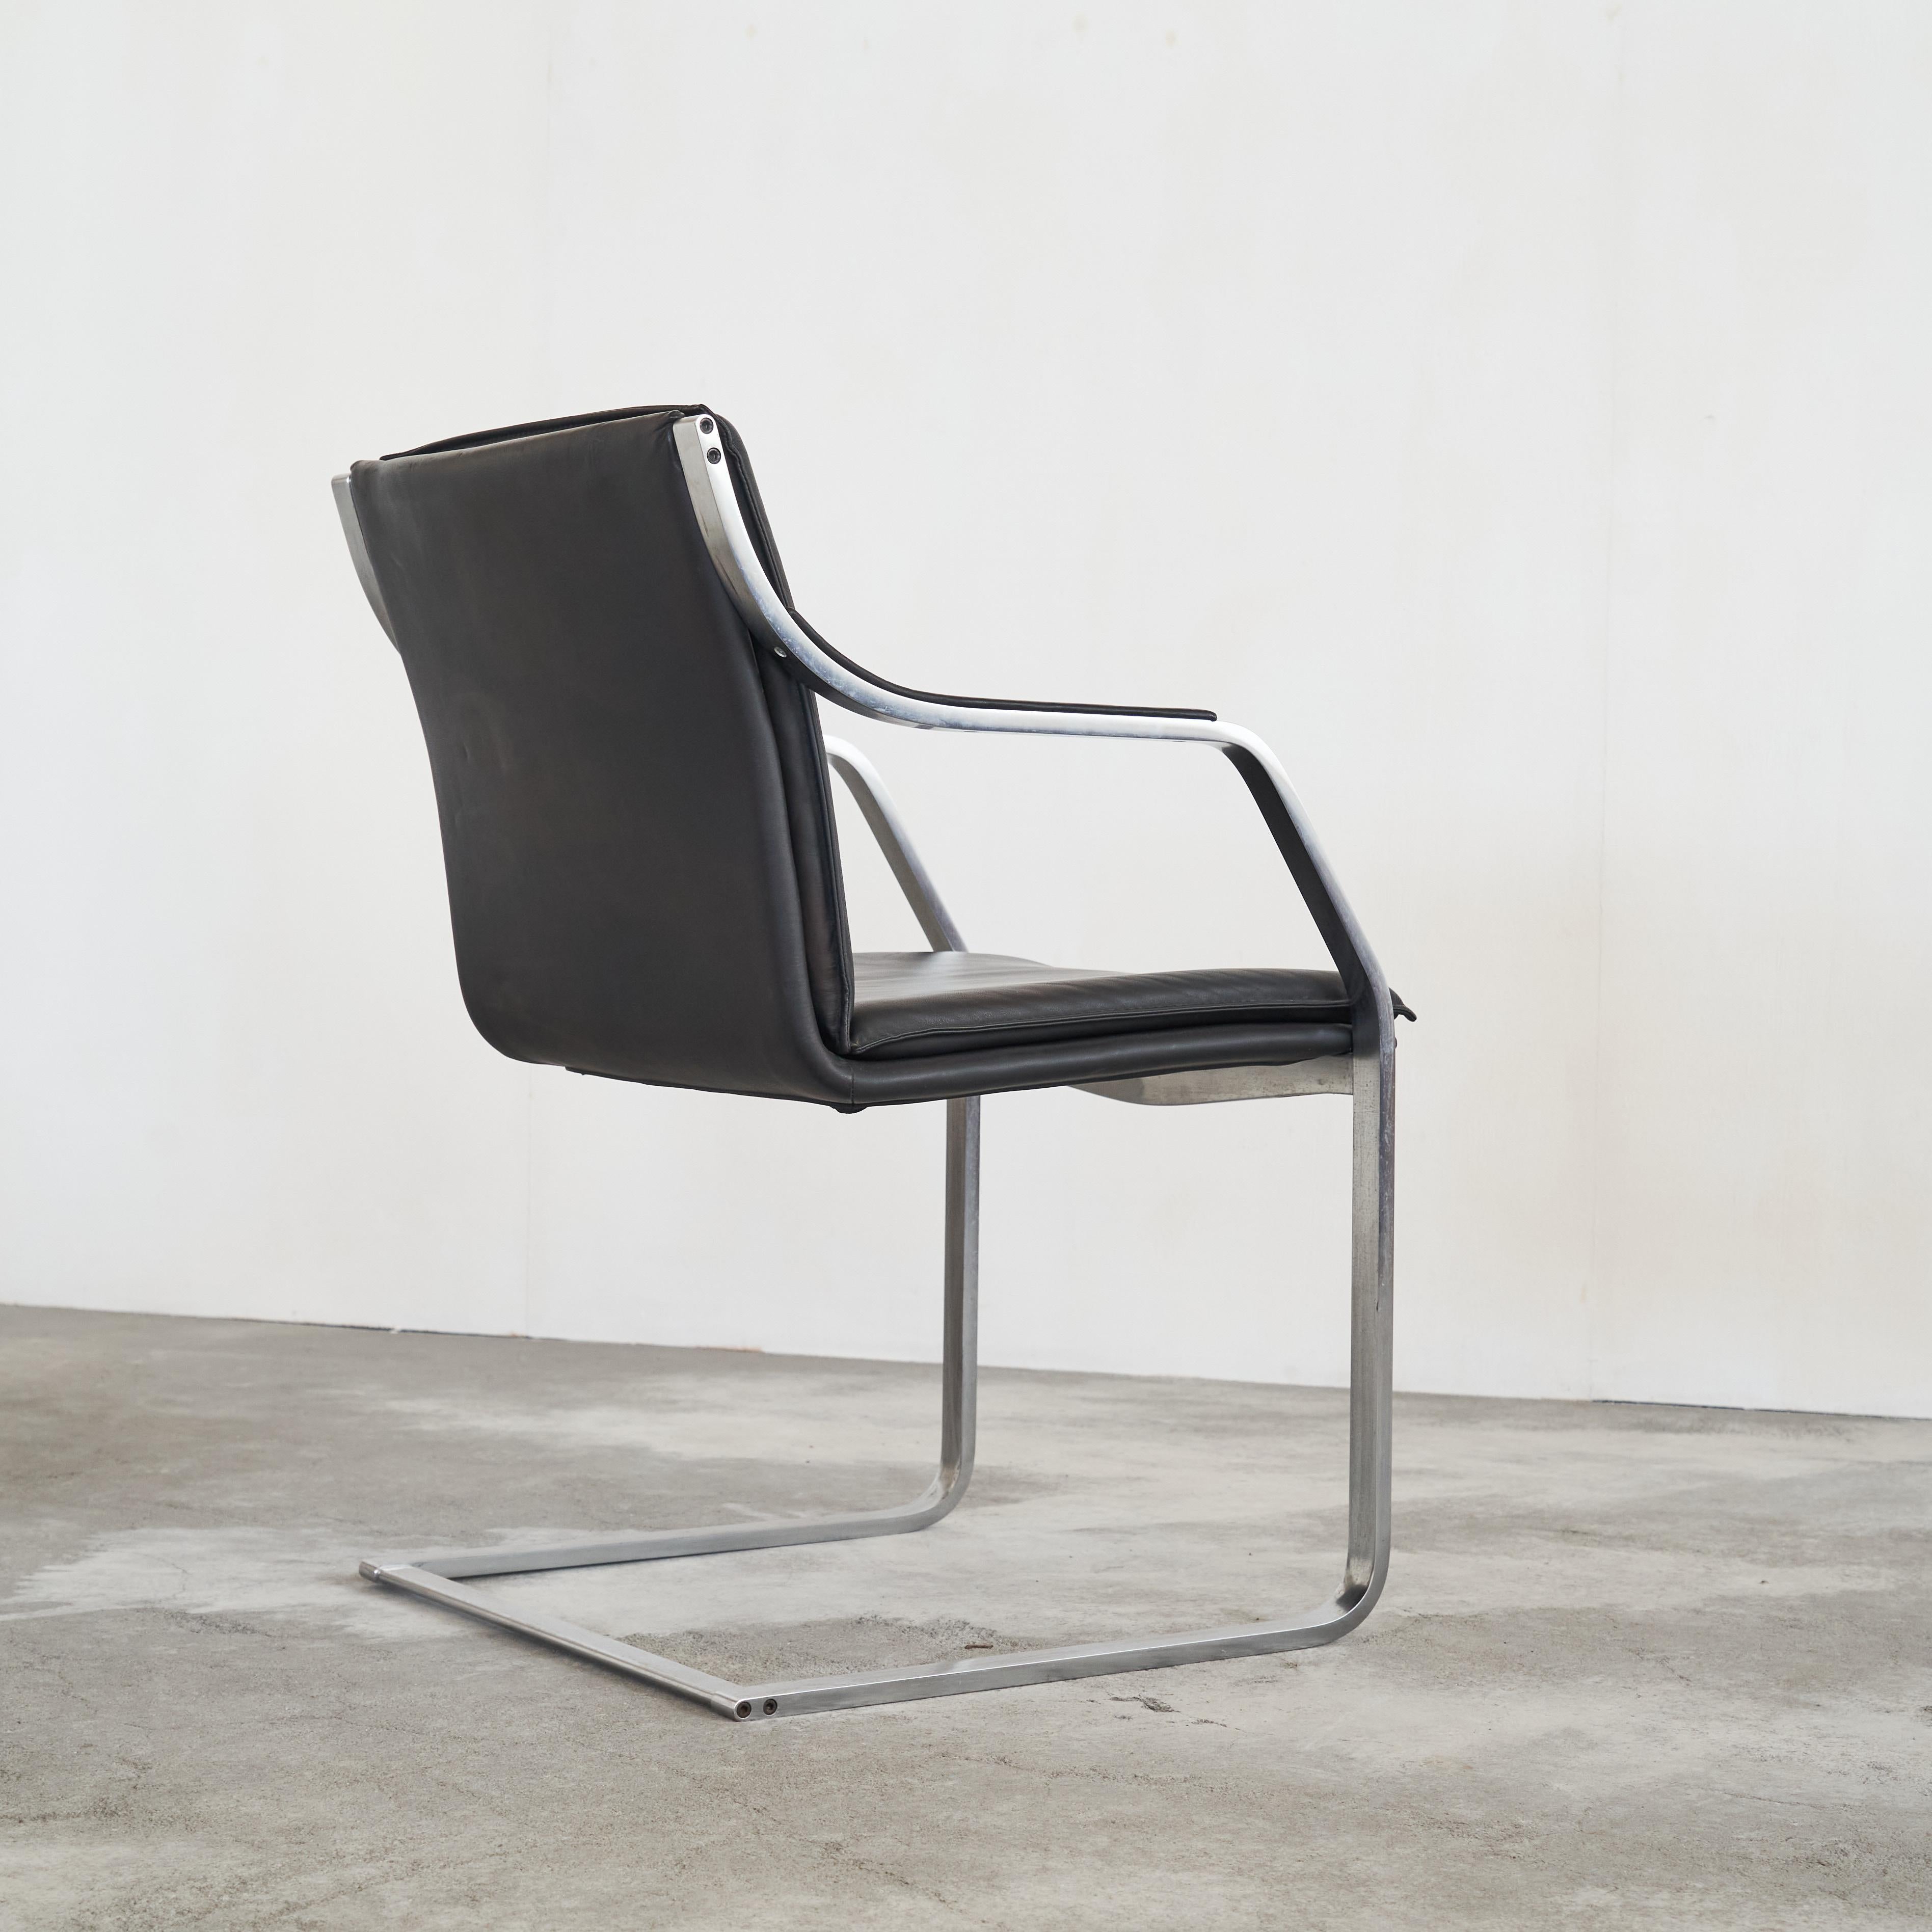 Rudolf Bernd Glatzel Armchair in Steel and Leather for Walter Knoll 1970s In Good Condition For Sale In Tilburg, NL